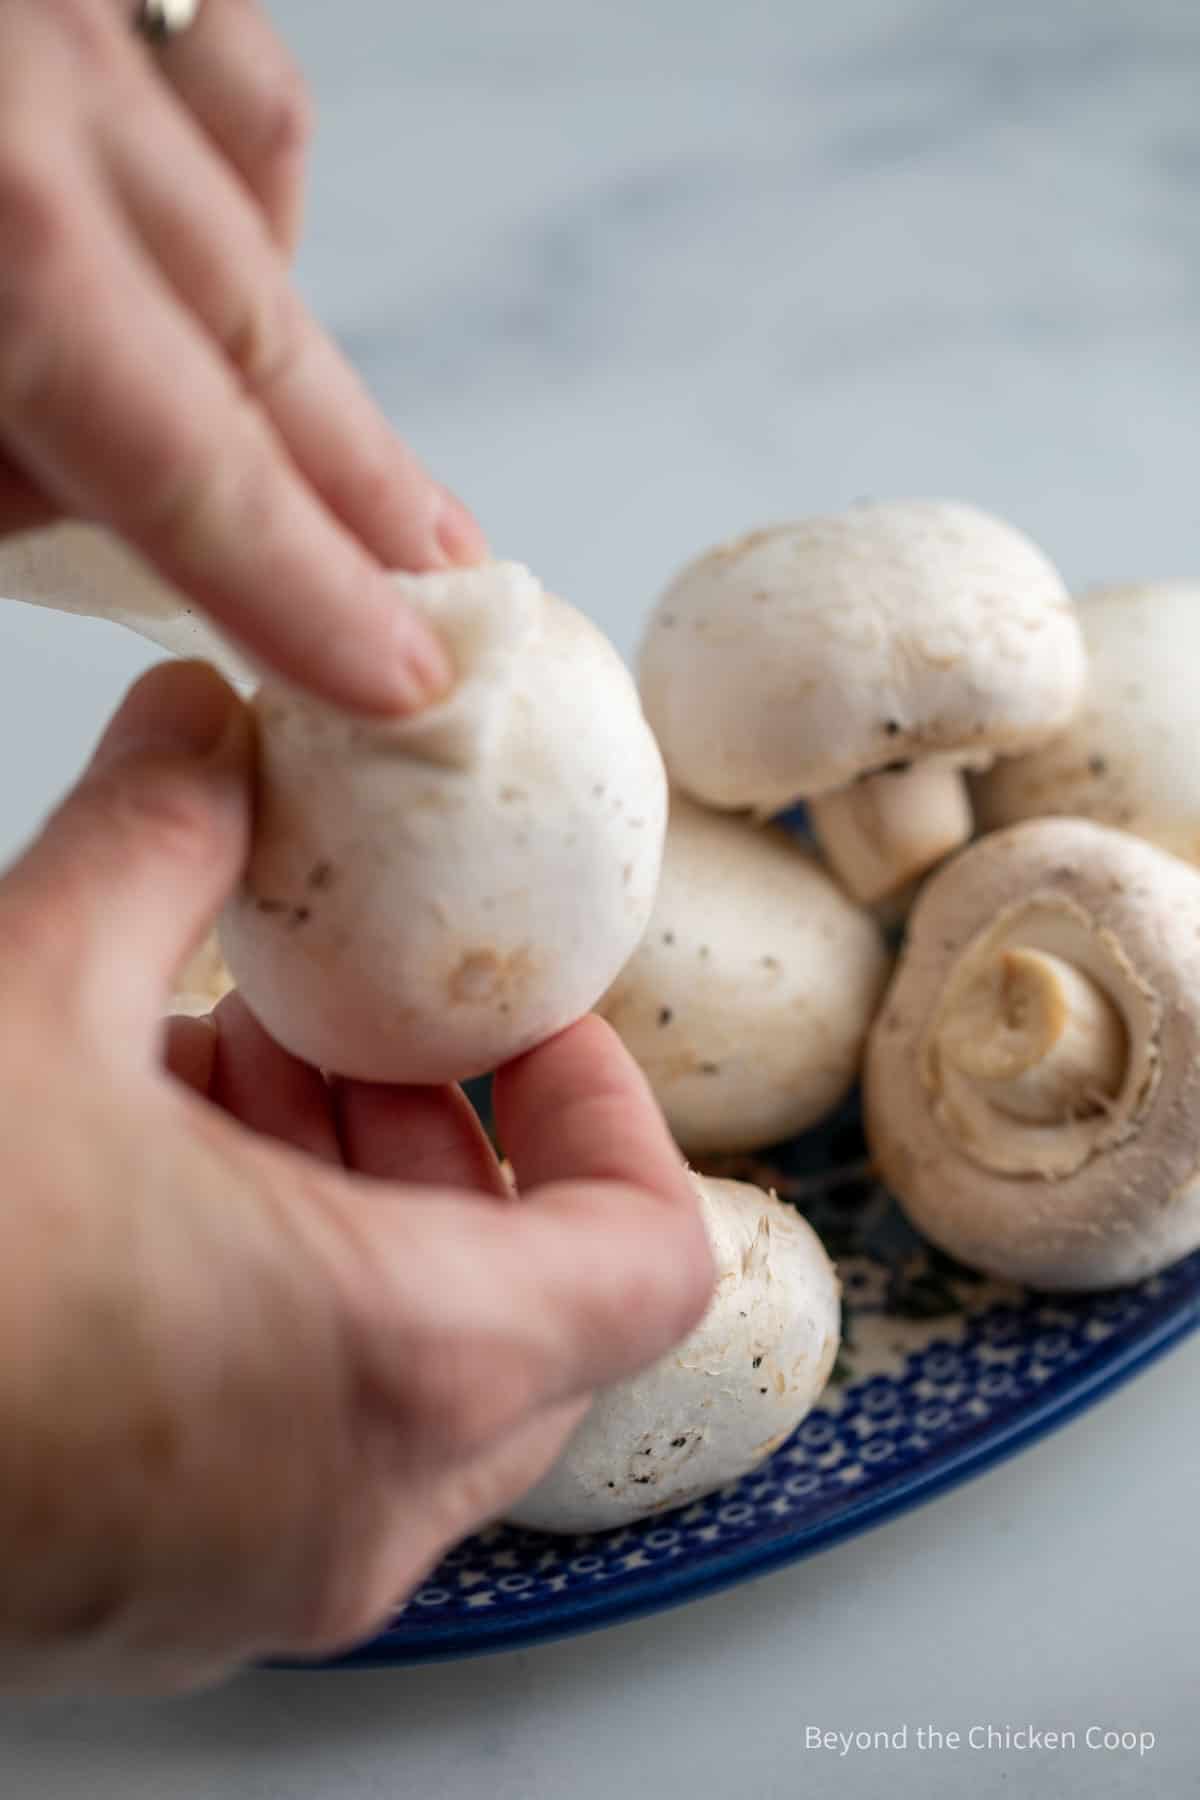 Wiping a mushroom with a paper towel. 